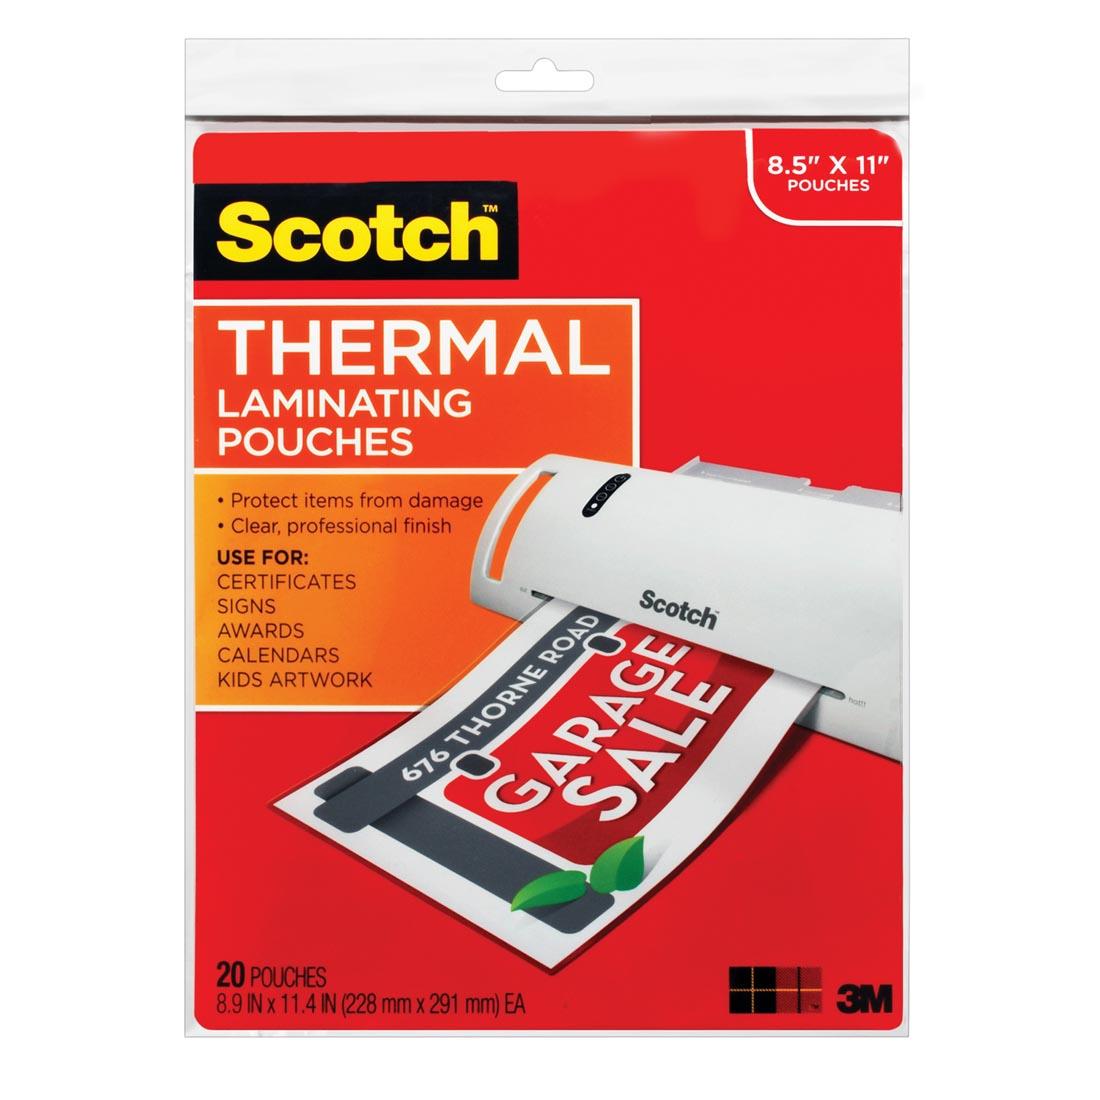 Scotch Thermal Laminating Pouches, Full-Sheets, 20-Count Package